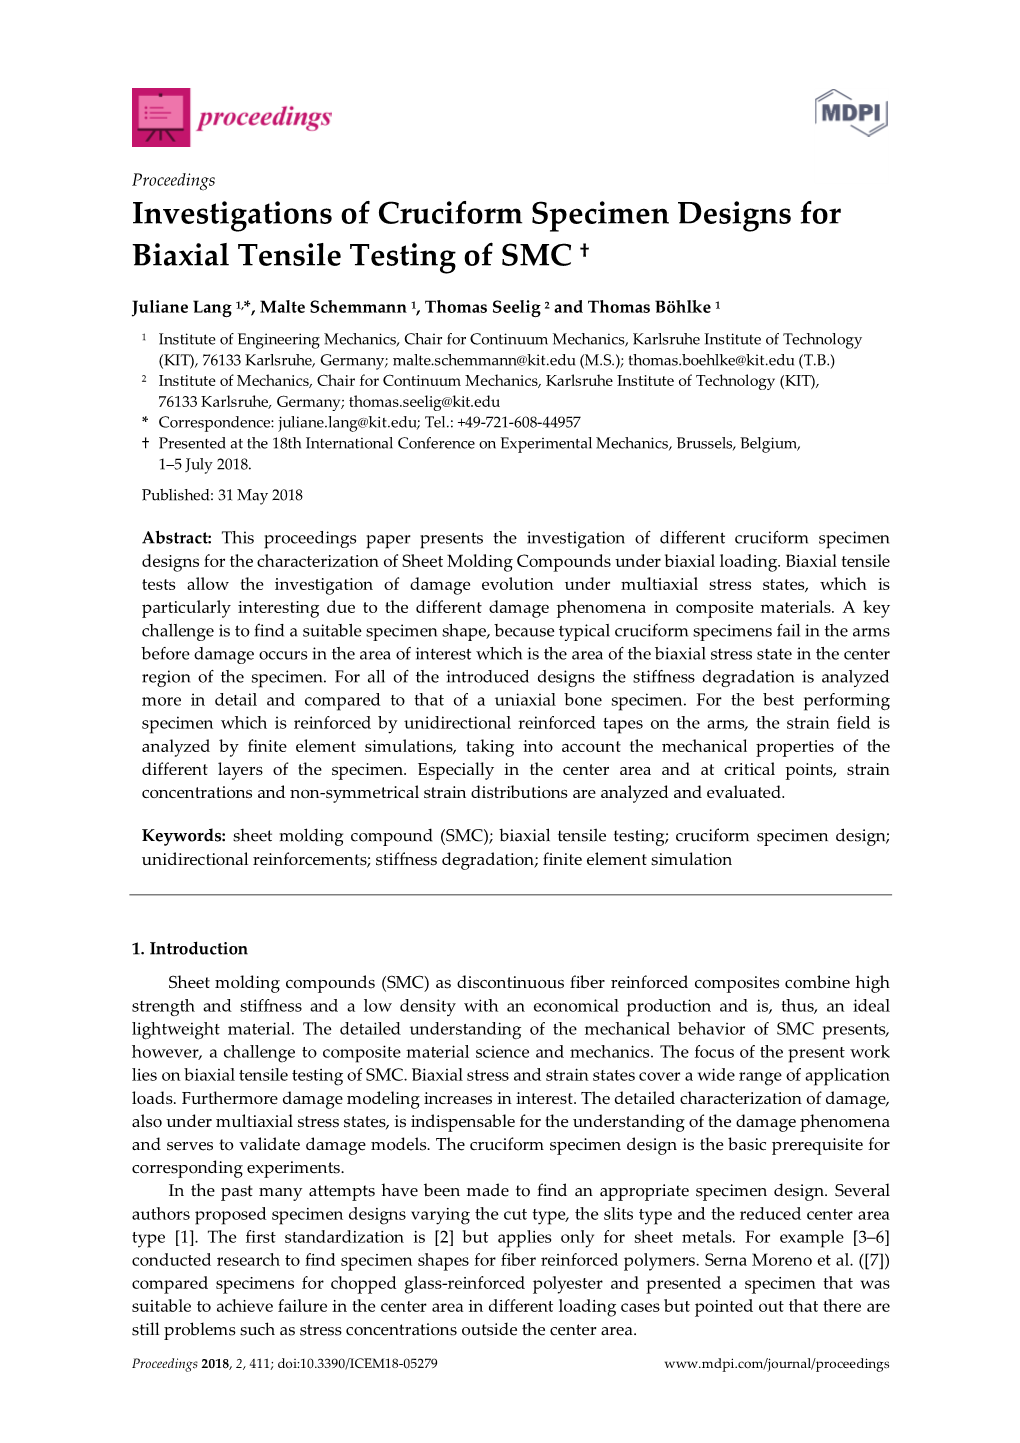 Investigations of Cruciform Specimen Designs for Biaxial Tensile Testing of SMC †